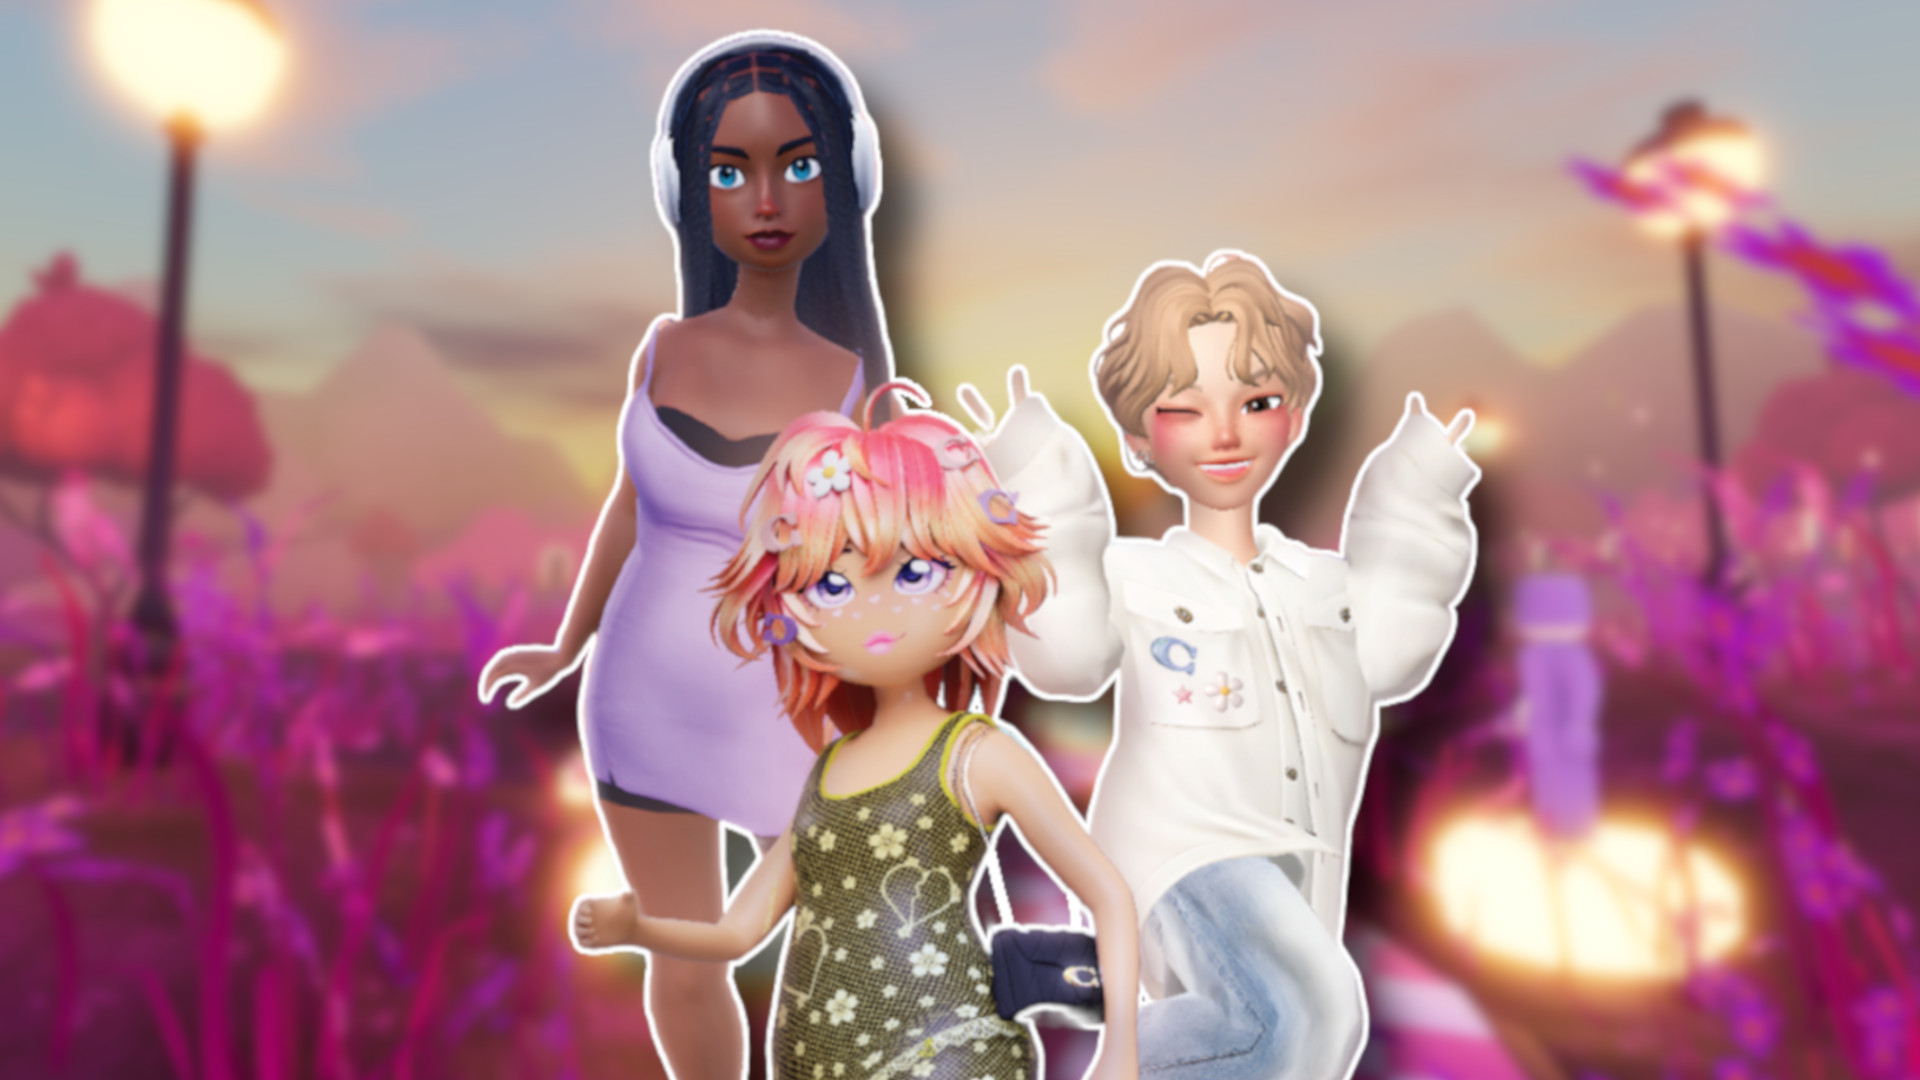 Find Your Courage in digital versions of Coach’s Colorful, Floral, and Summer worlds across Roblox and Zepeto